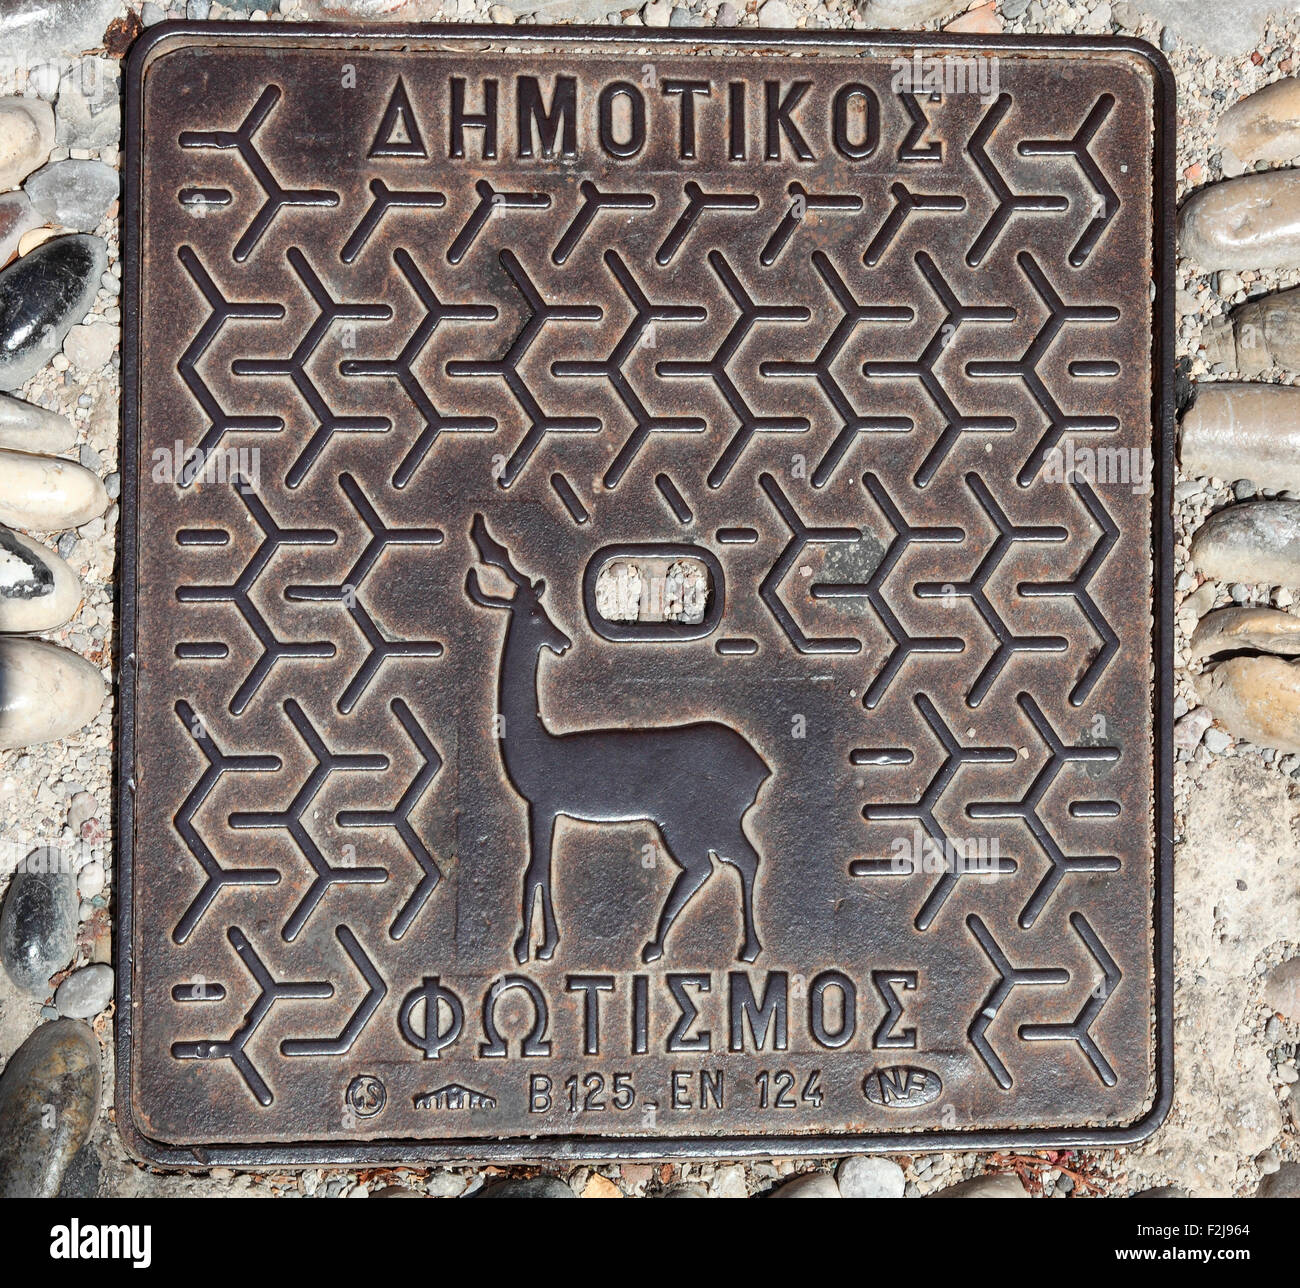 Rhodes drain cover showing the deer, symbol of Rhodes Stock Photo